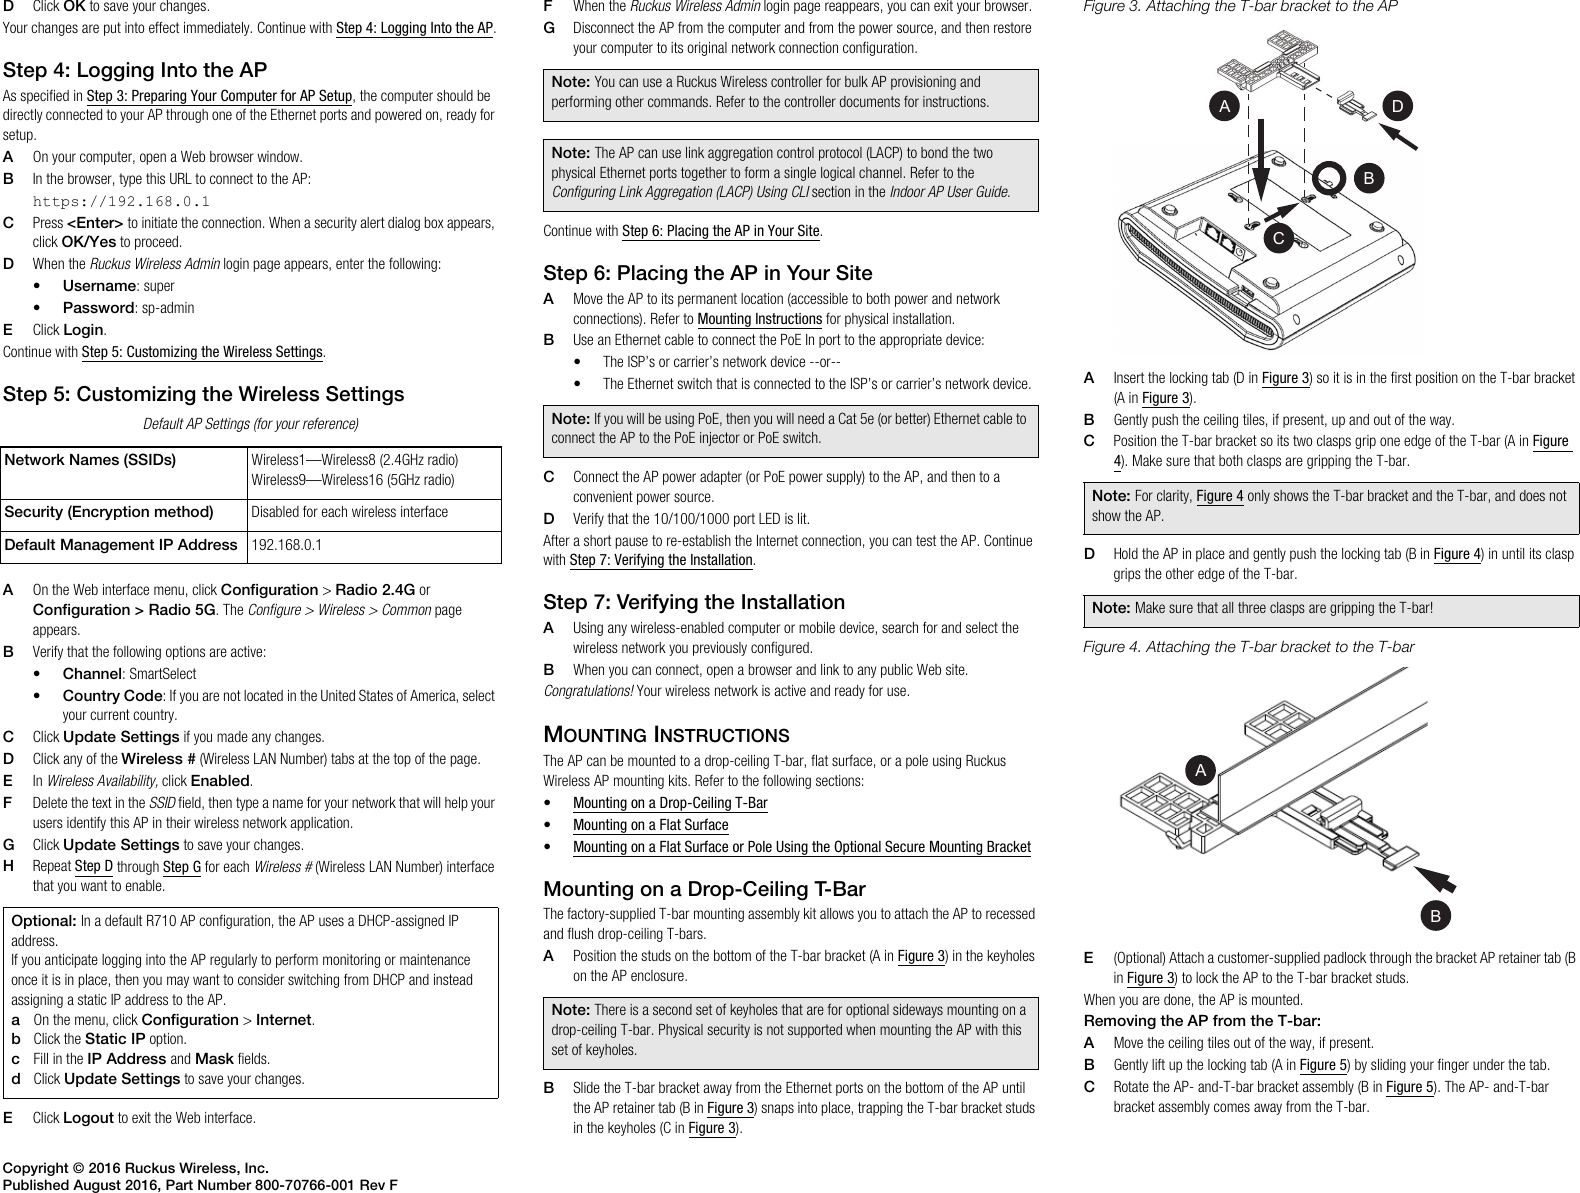 Page 2 of 4 - Ruckus R710 Access Point Quick Setup Guide Wireless R710-QSG-800-70766-001-Rev F-20160819-1